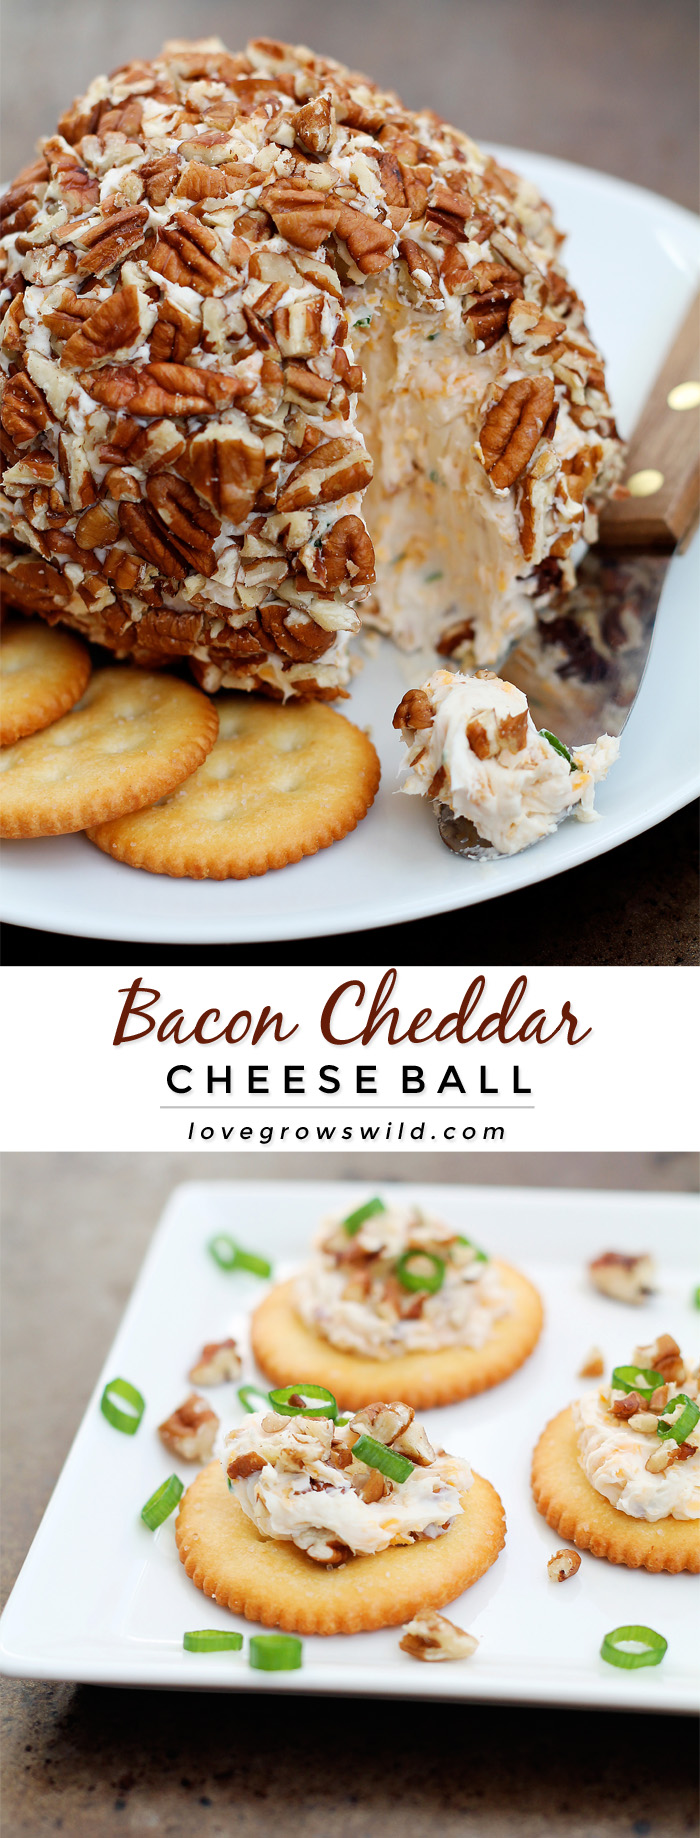 This Bacon Cheddar Cheese Ball is always a party favorite!  Super creamy, loaded with bacon, and wrapped in pecans for a delicious and easy appetizer! | LoveGrowsWild.com